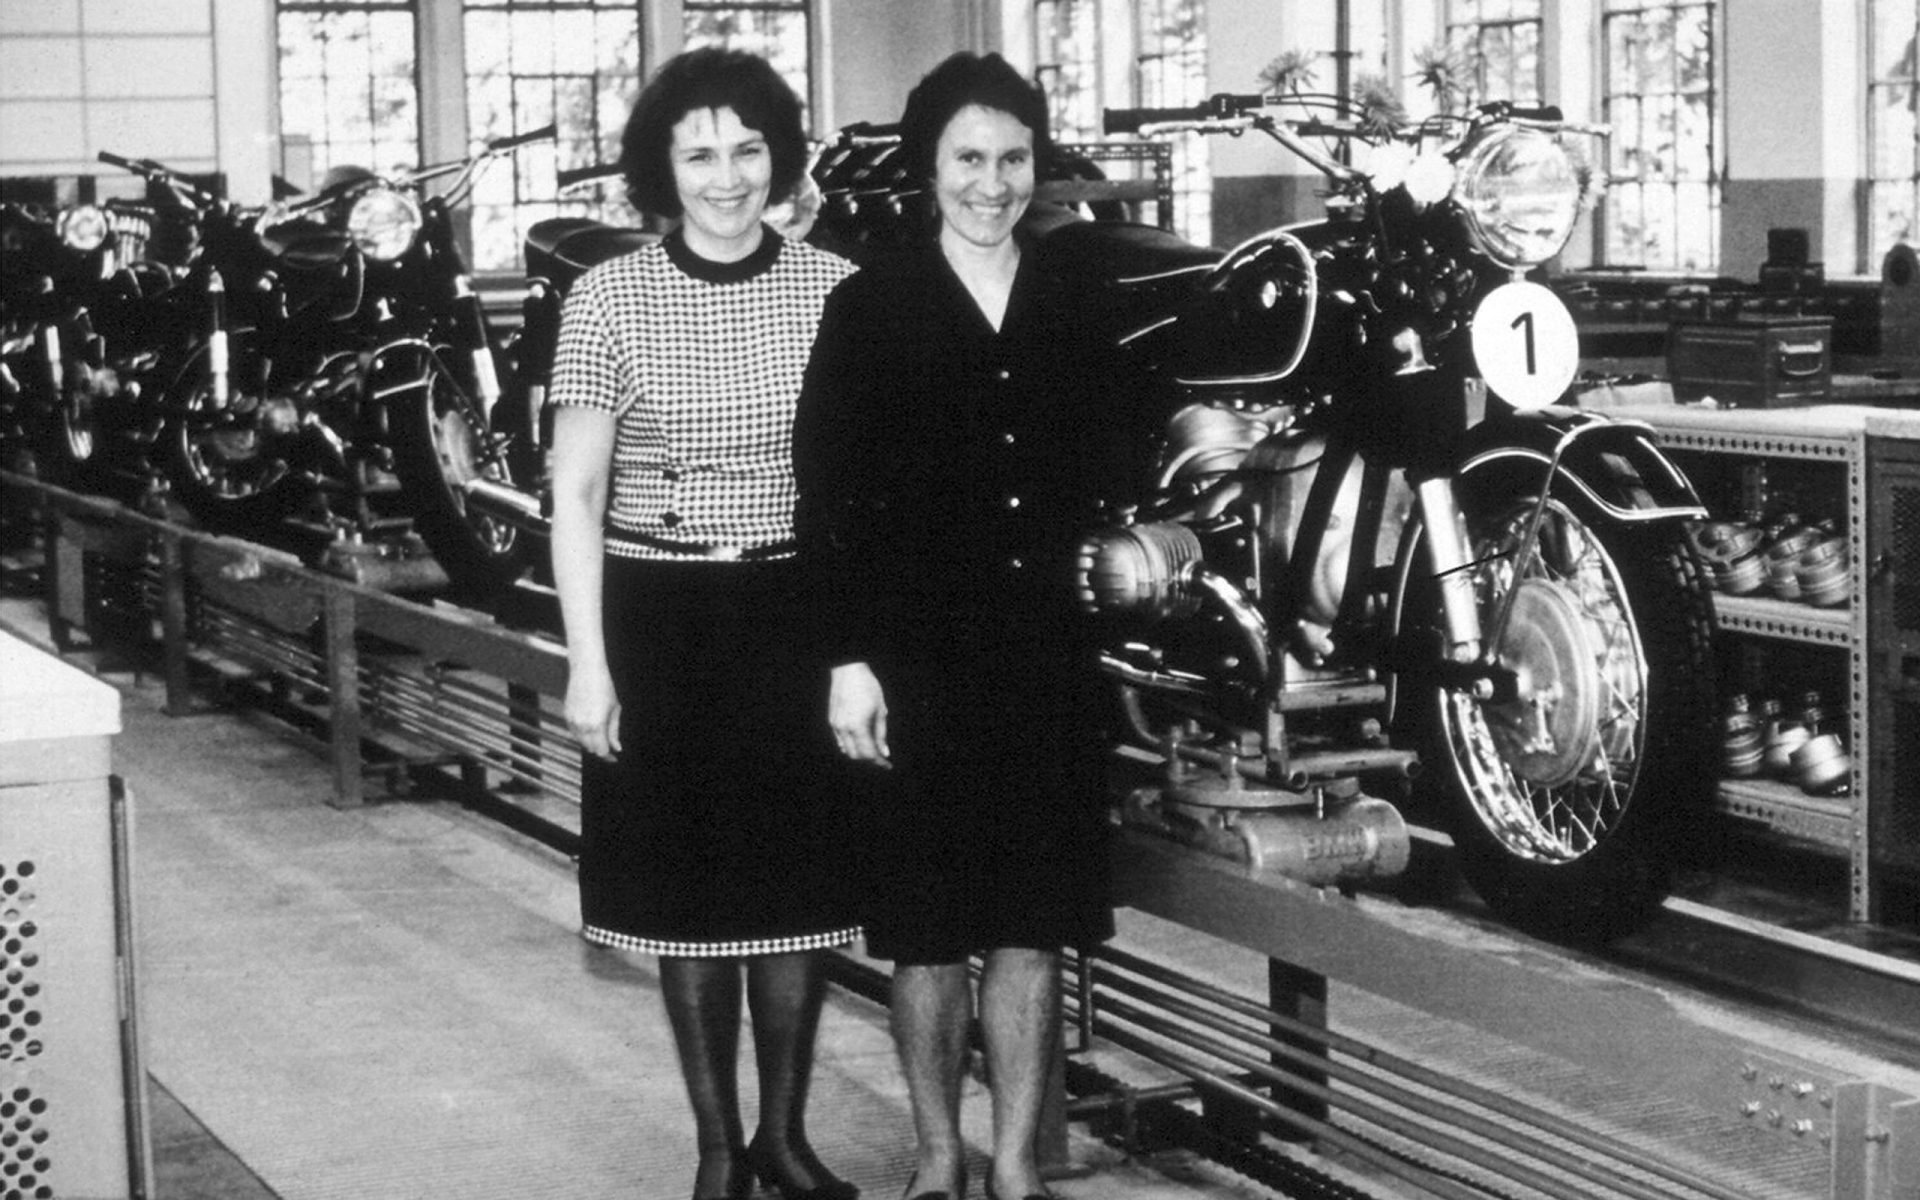 First BMW motorcycle R60/2 rolls off the line at the Berlin plant